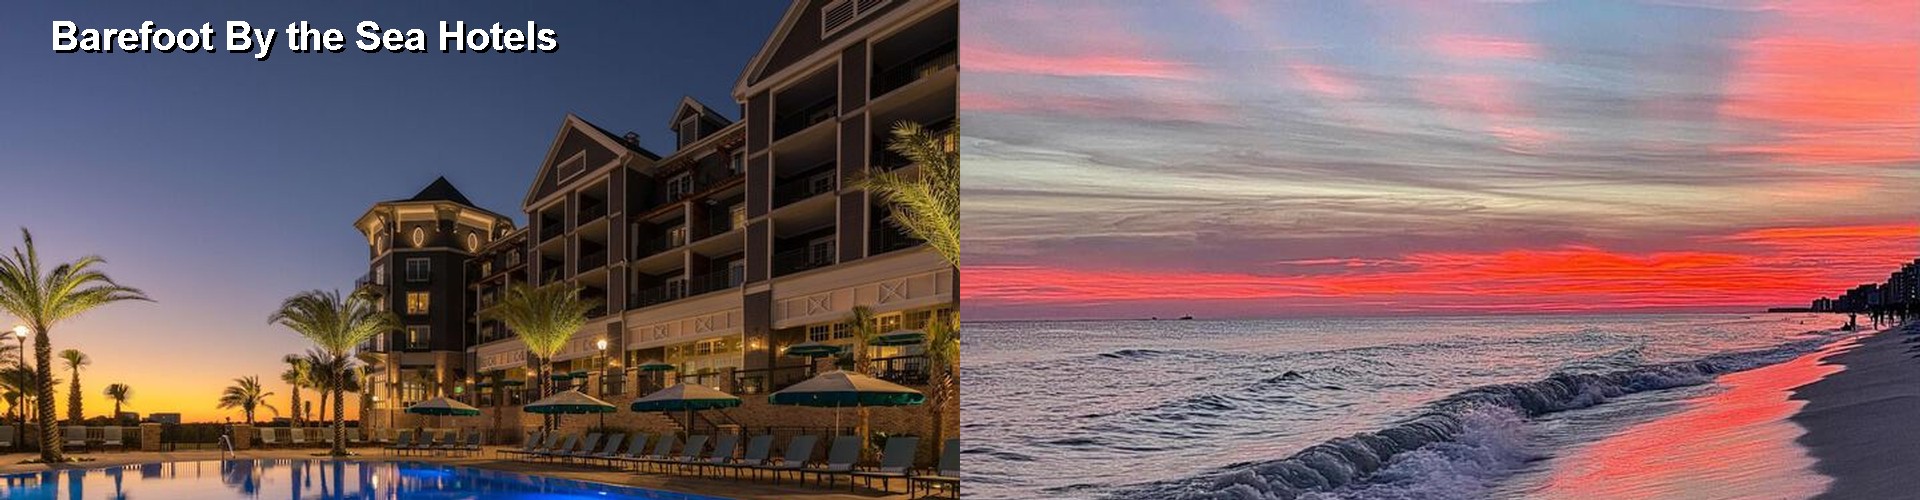 4 Best Hotels near Barefoot By the Sea